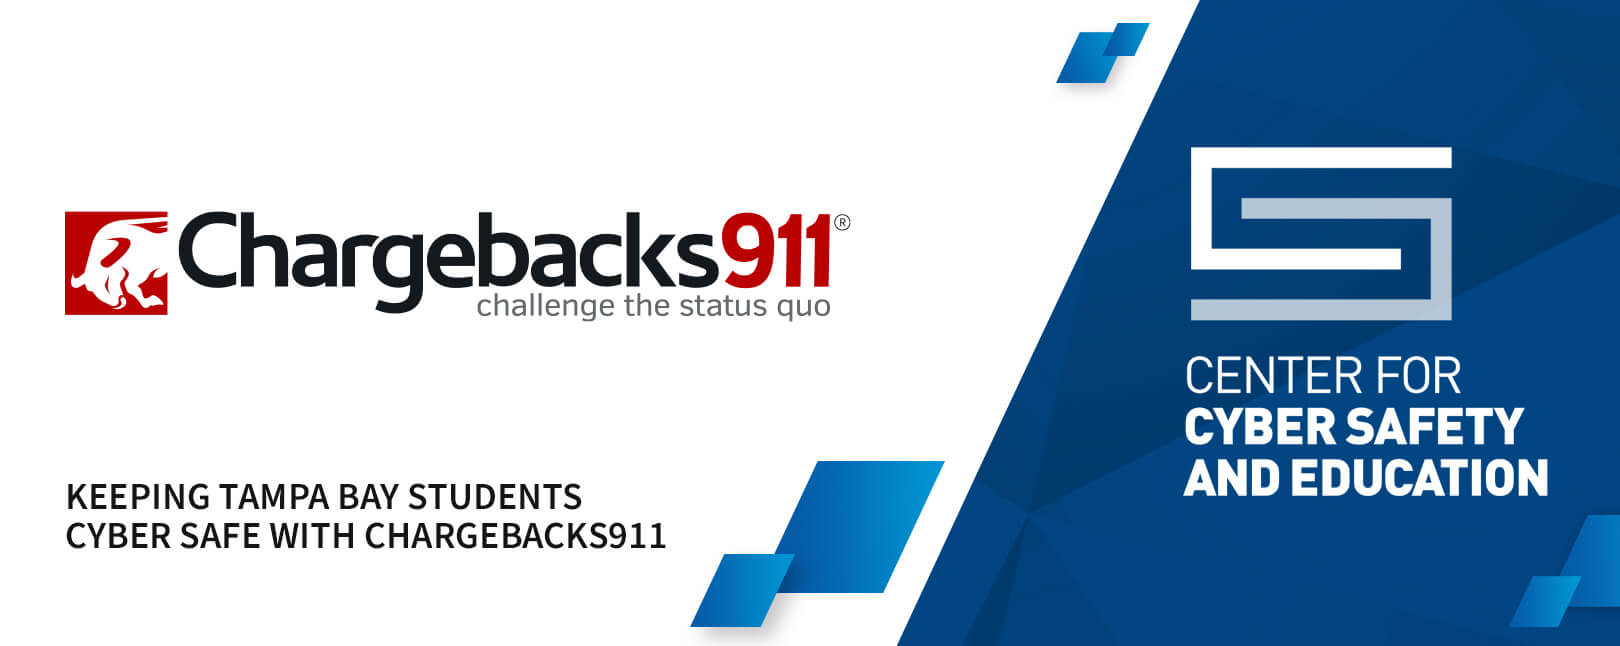 Chargebacks911® Helping Keep Tampa Bay Students Cyber-Safe in 2022